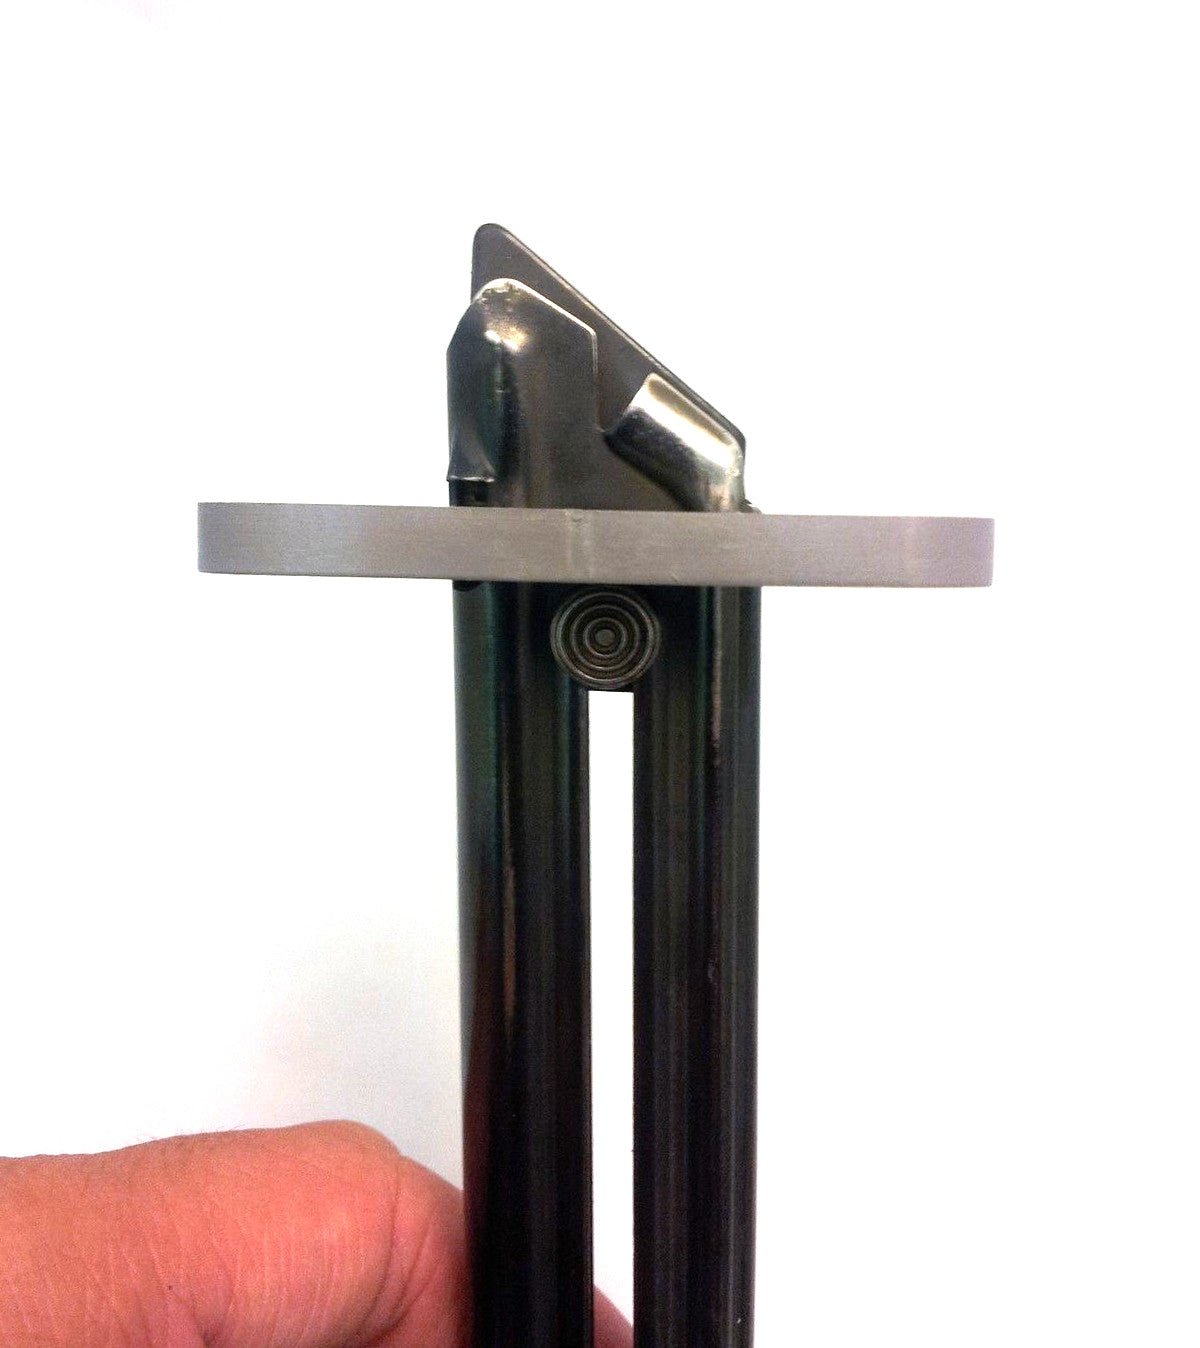 22LRD Magazine Speed Loader Aid Tool for Smith & Wesson Walther Ruger .22lr Long Rifle 22LR